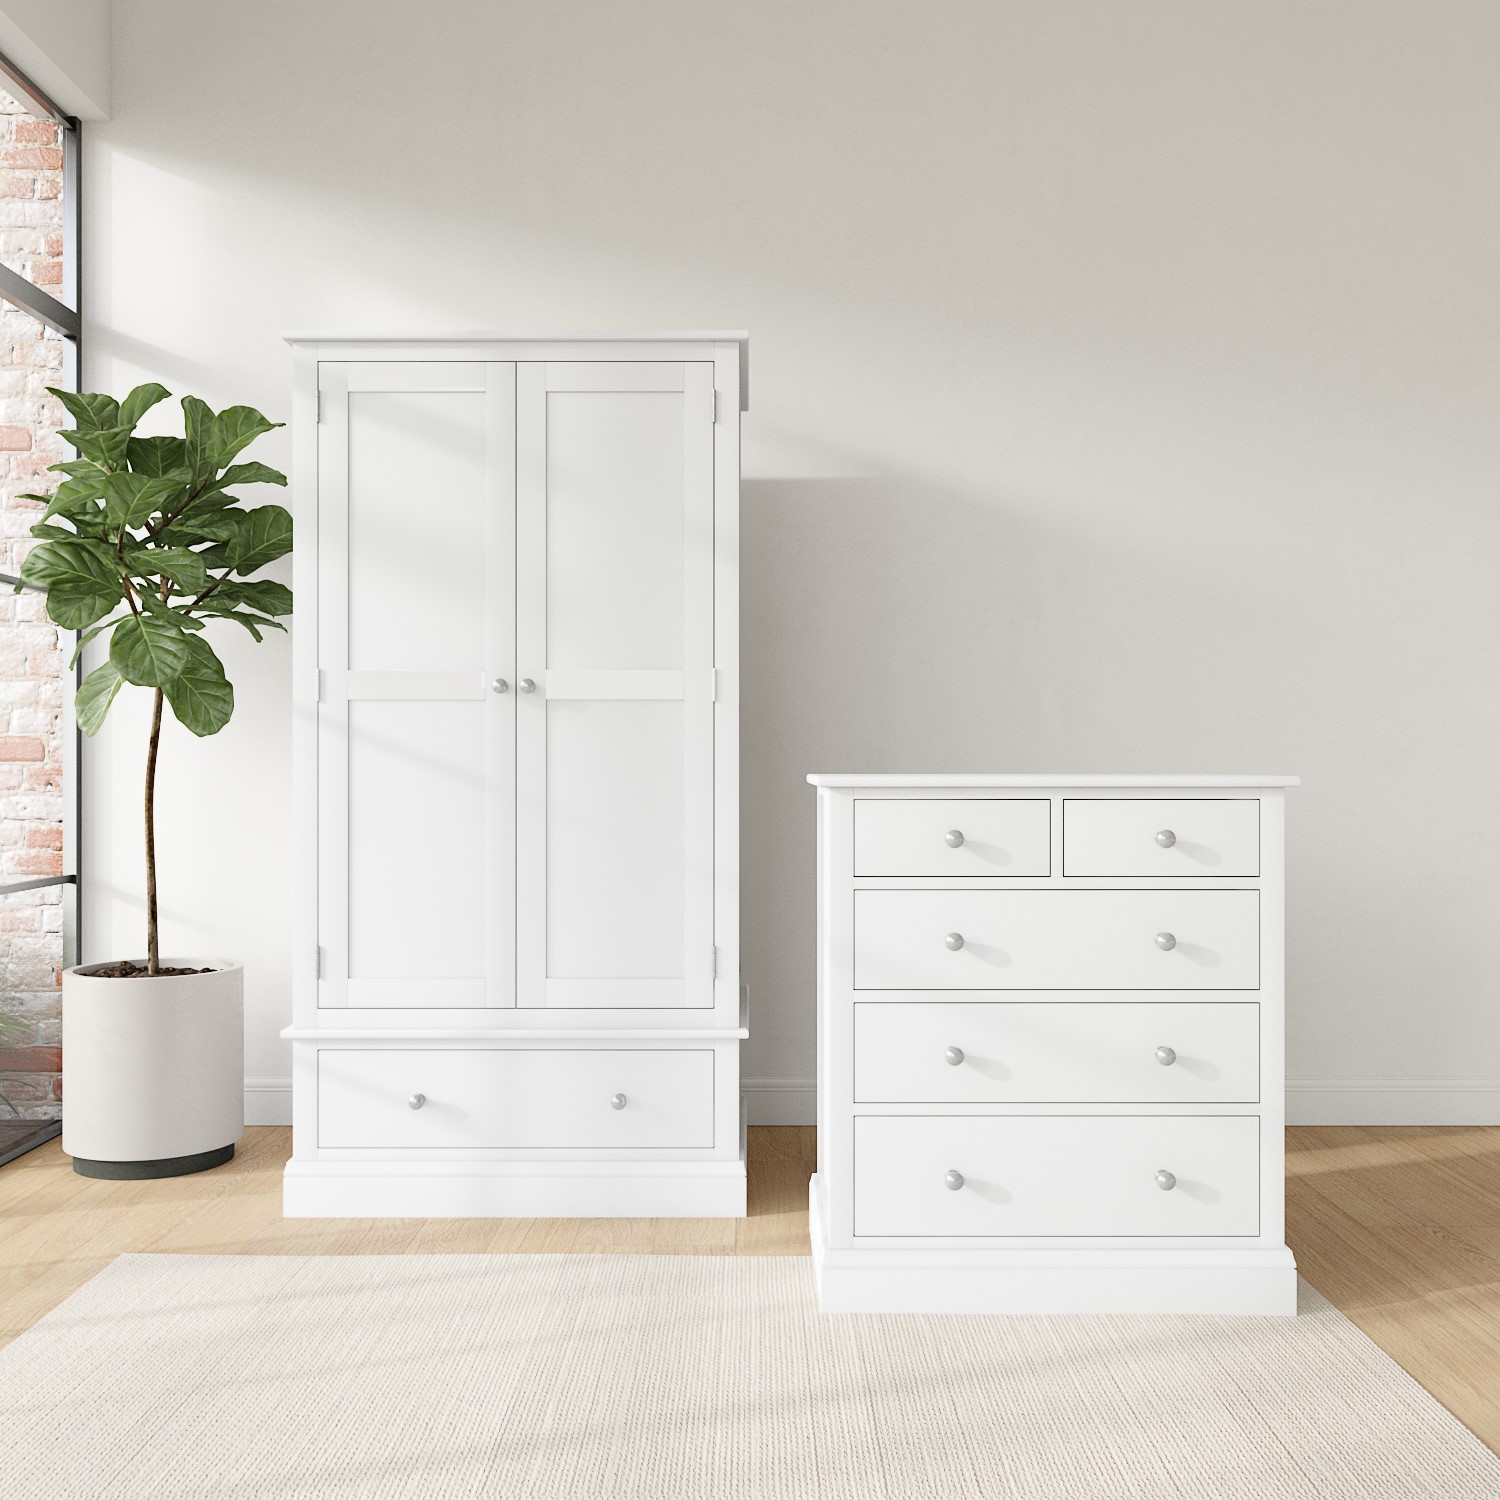 Photo of White wardrobe and chest of drawers set - harper